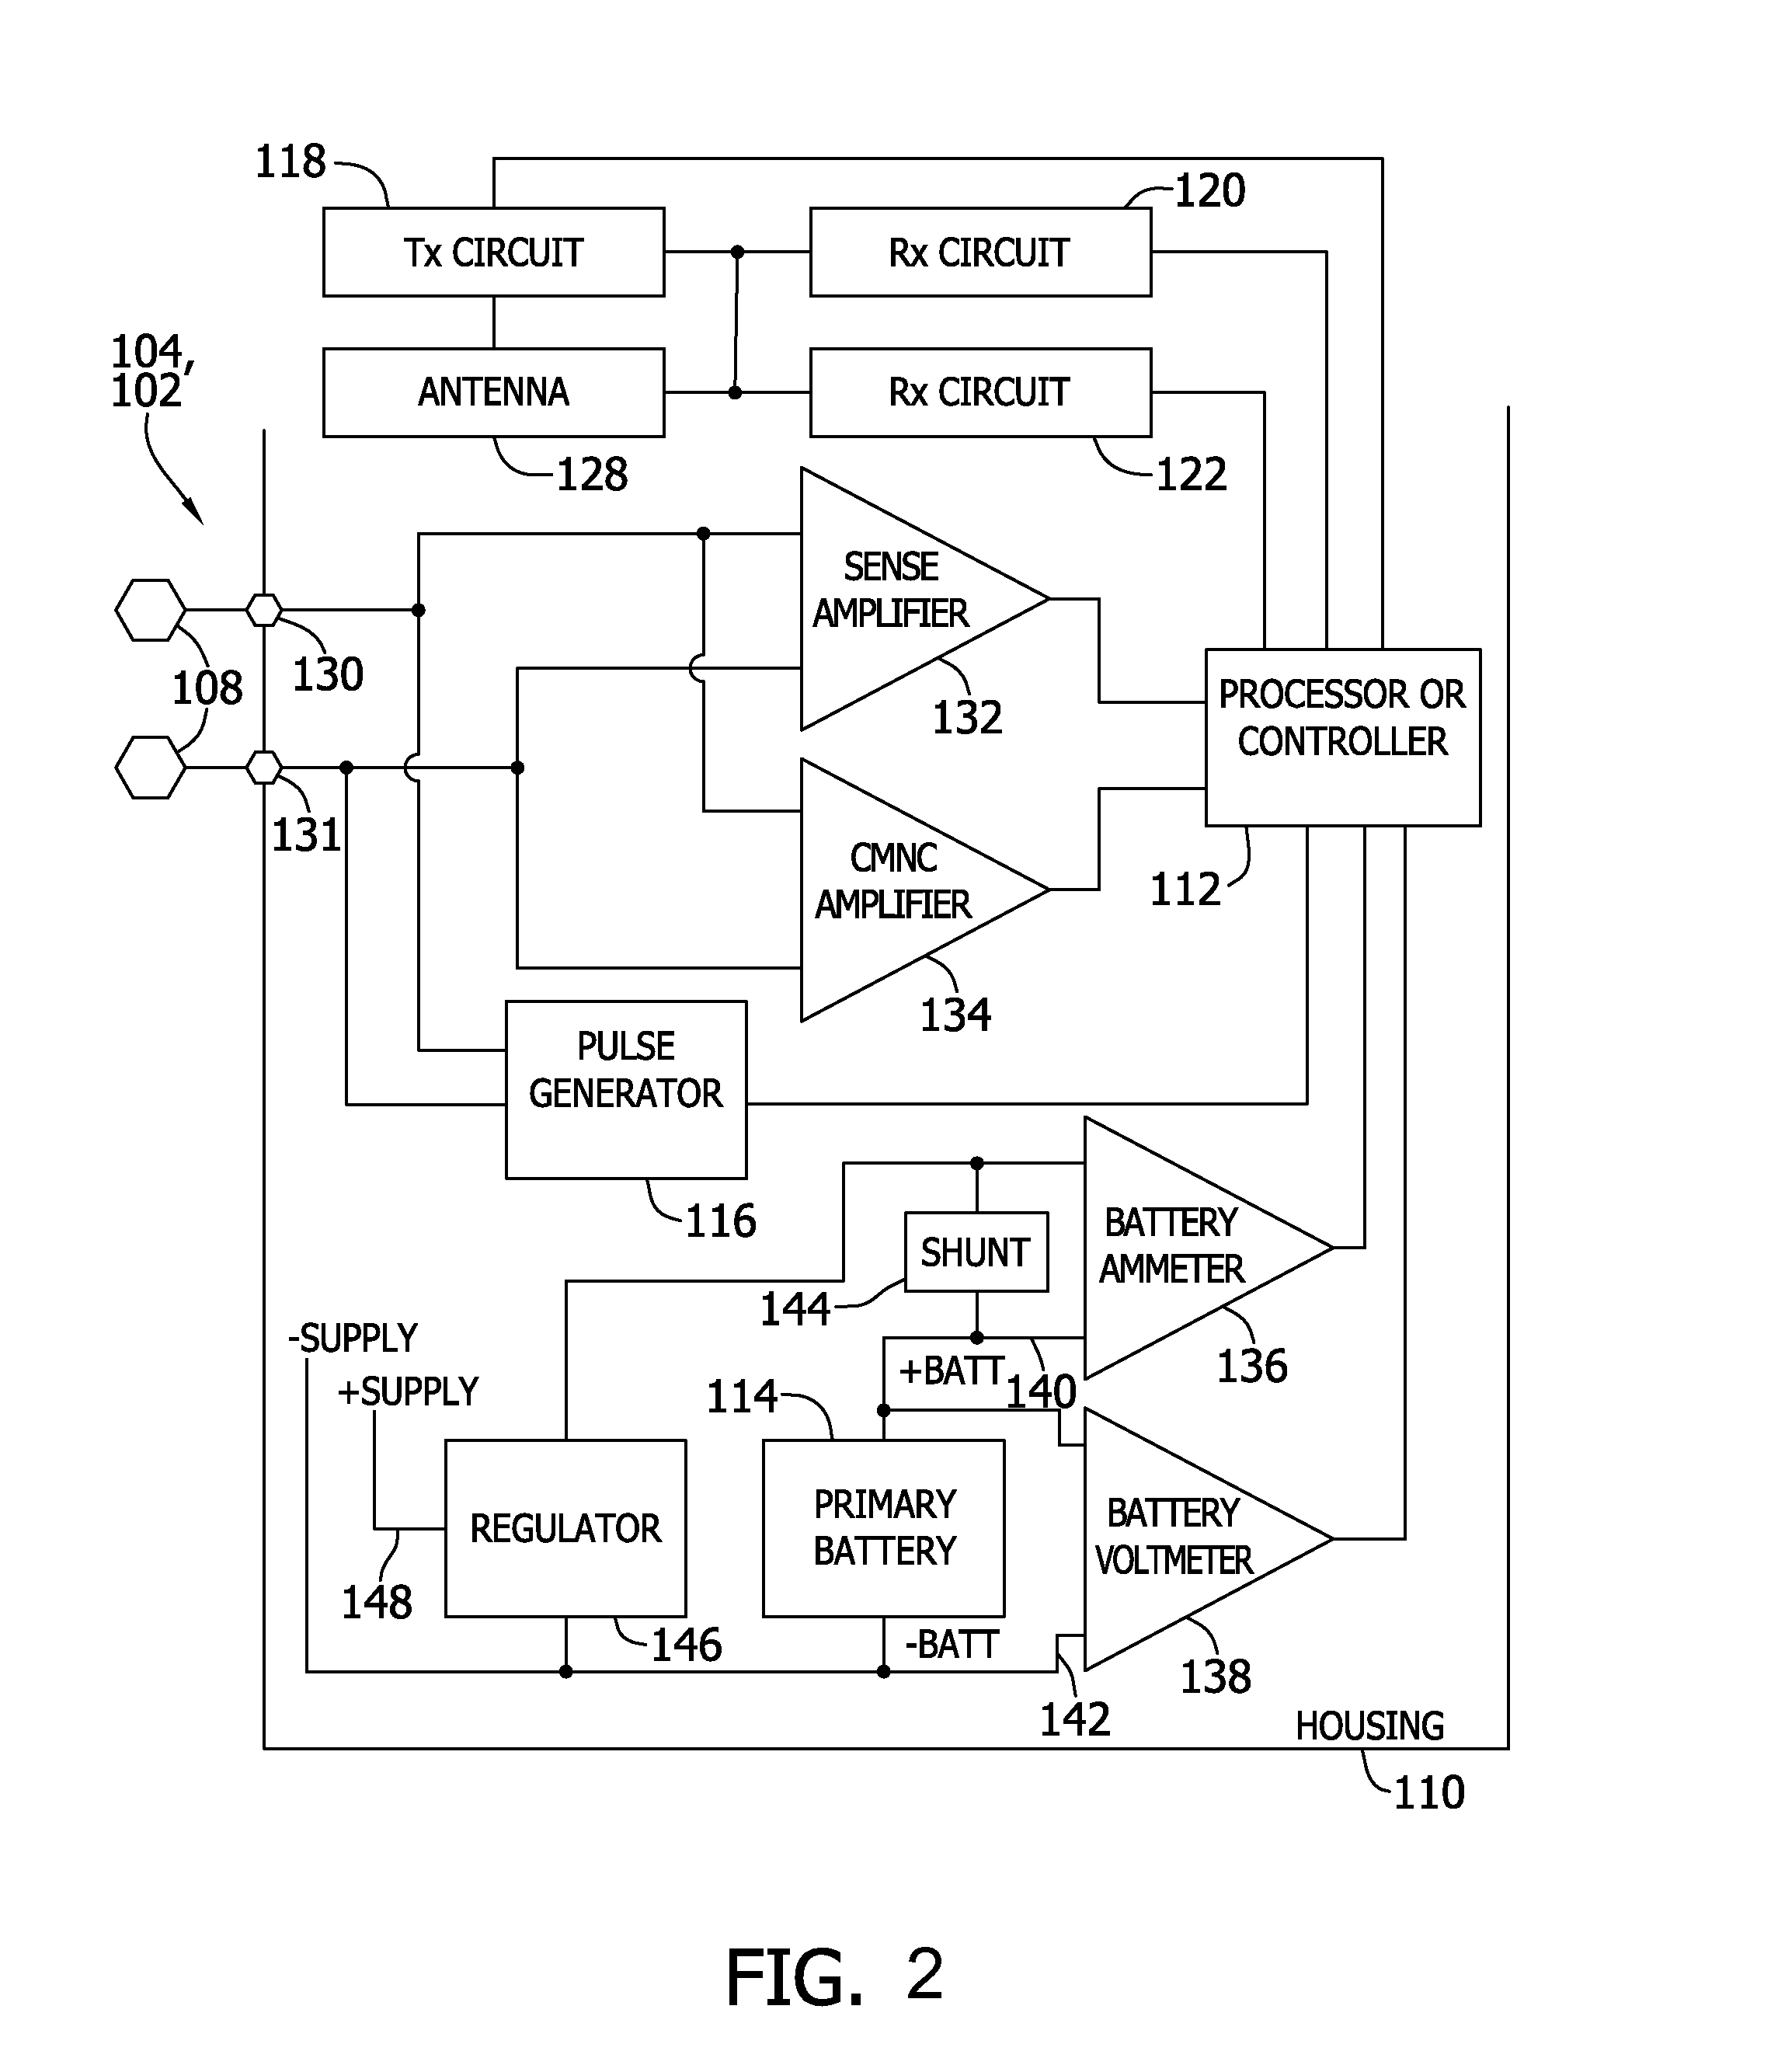 Dual chamber leadless pacemaker programmer and method